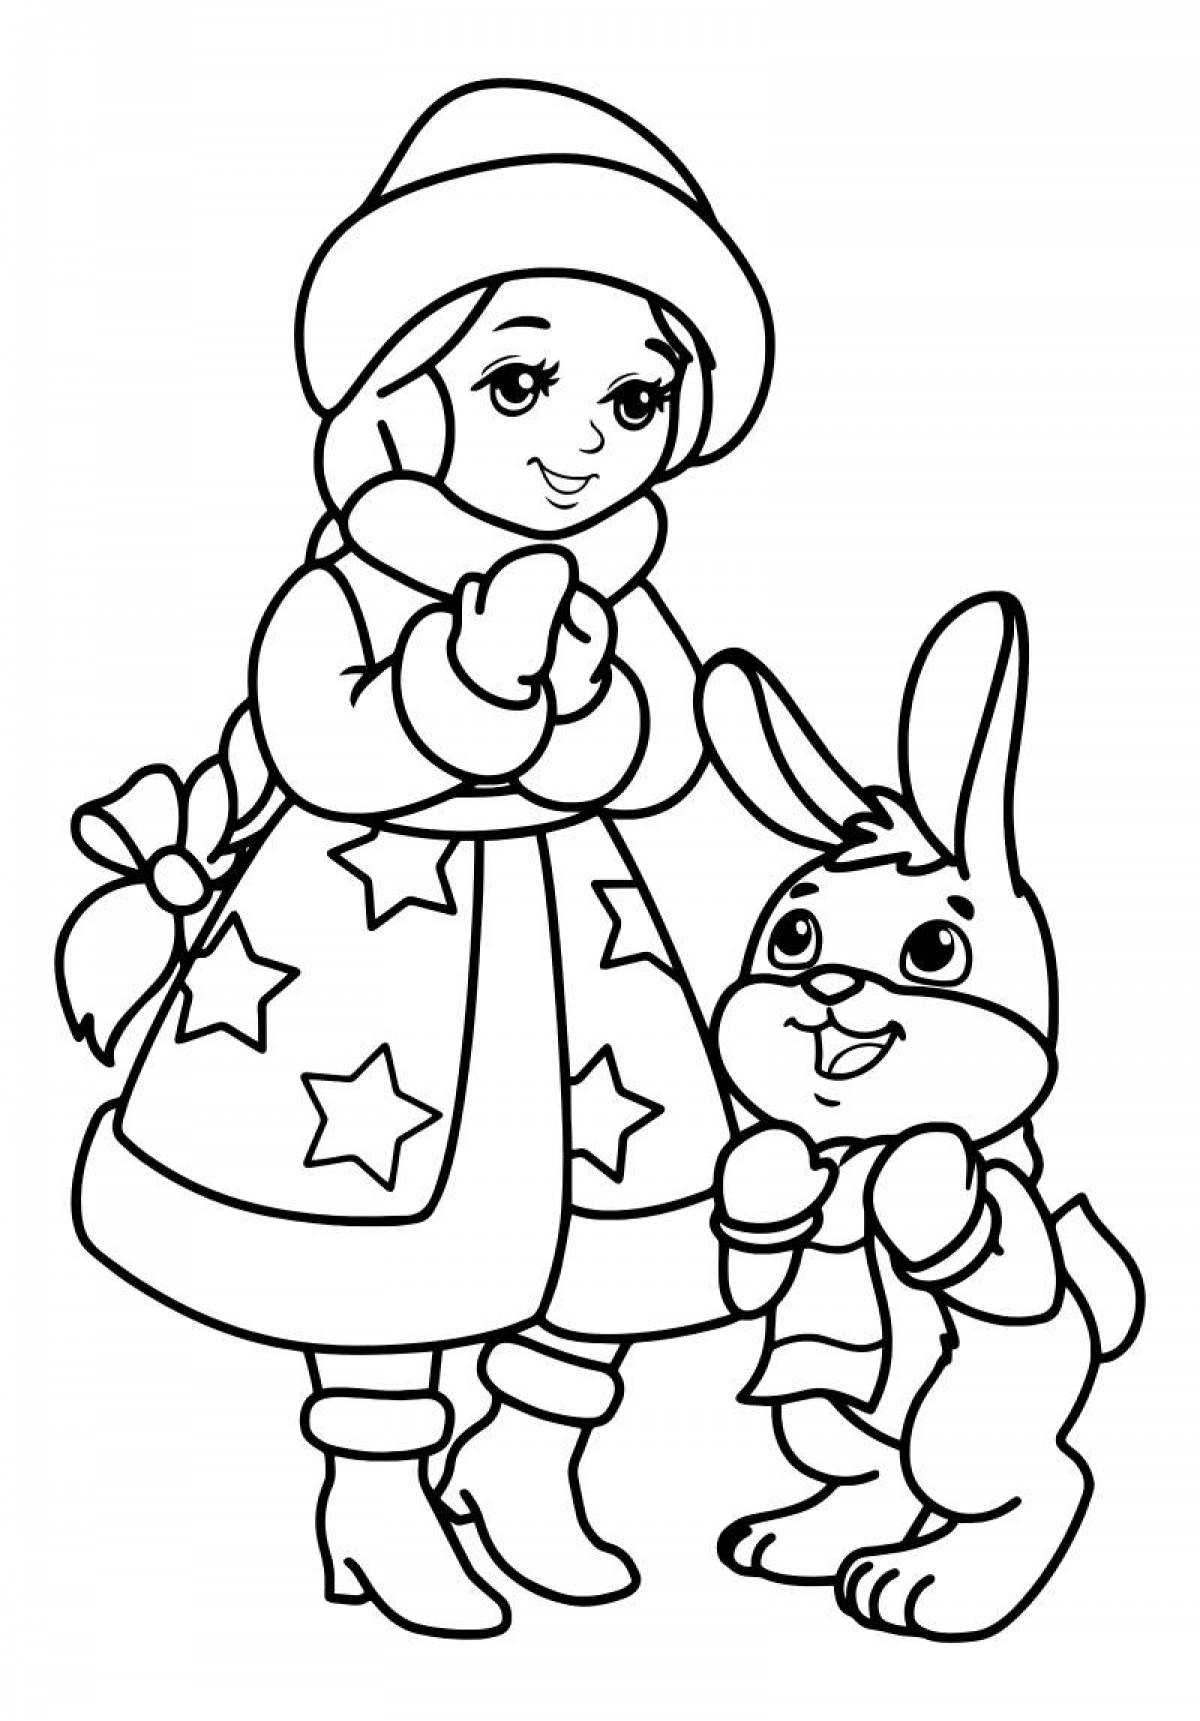 Snow Maiden rainbow coloring for kids